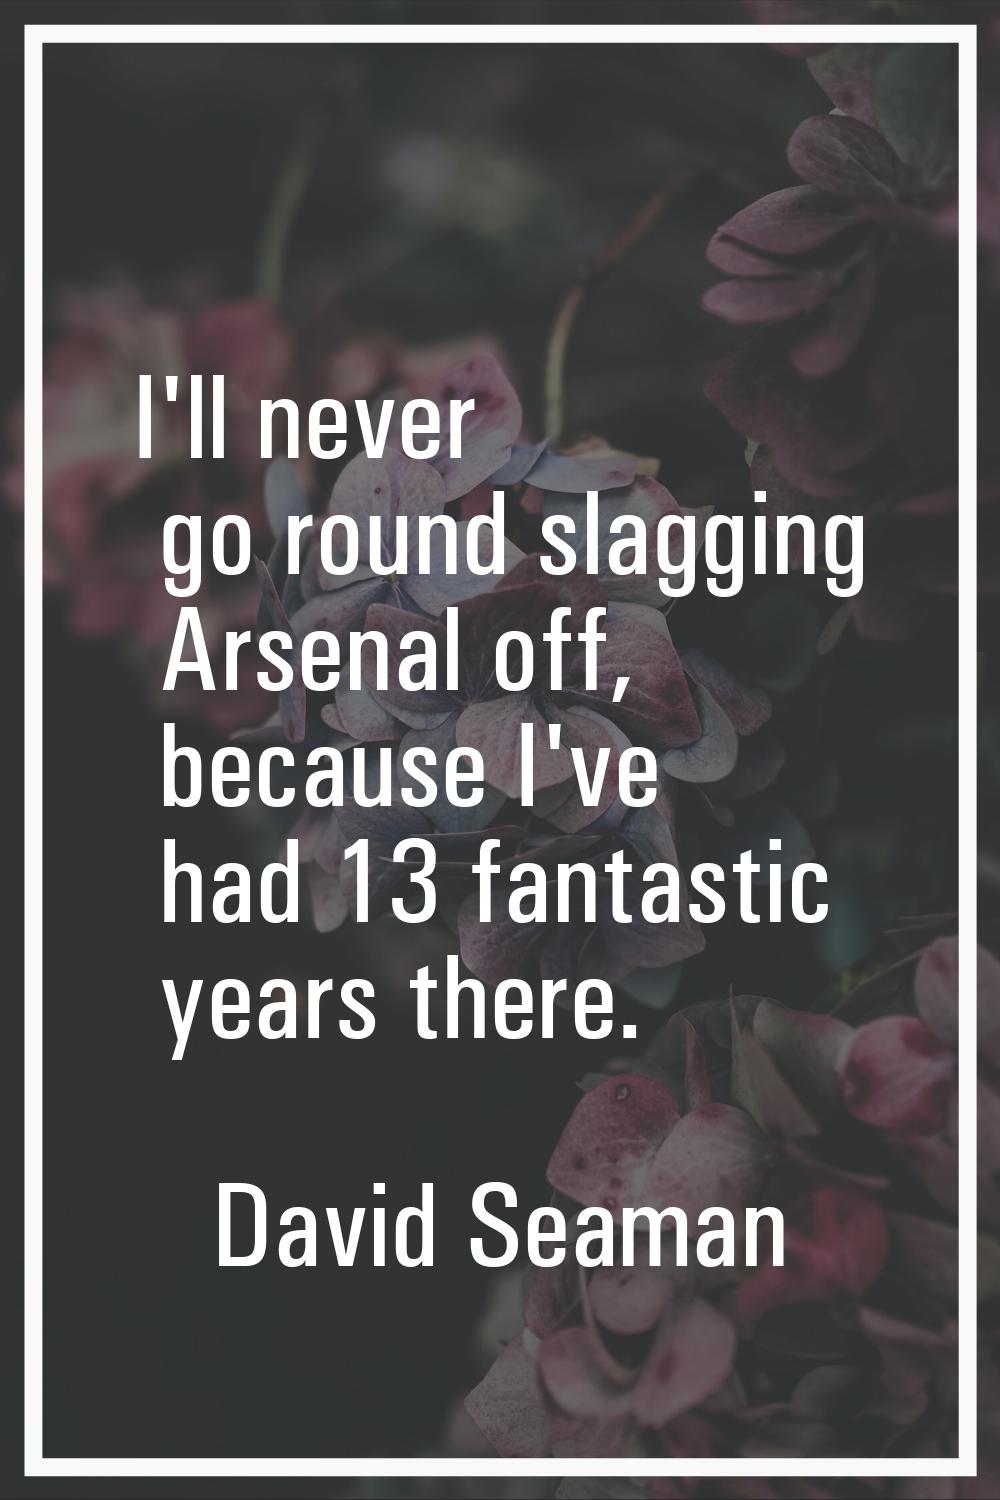 I'll never go round slagging Arsenal off, because I've had 13 fantastic years there.